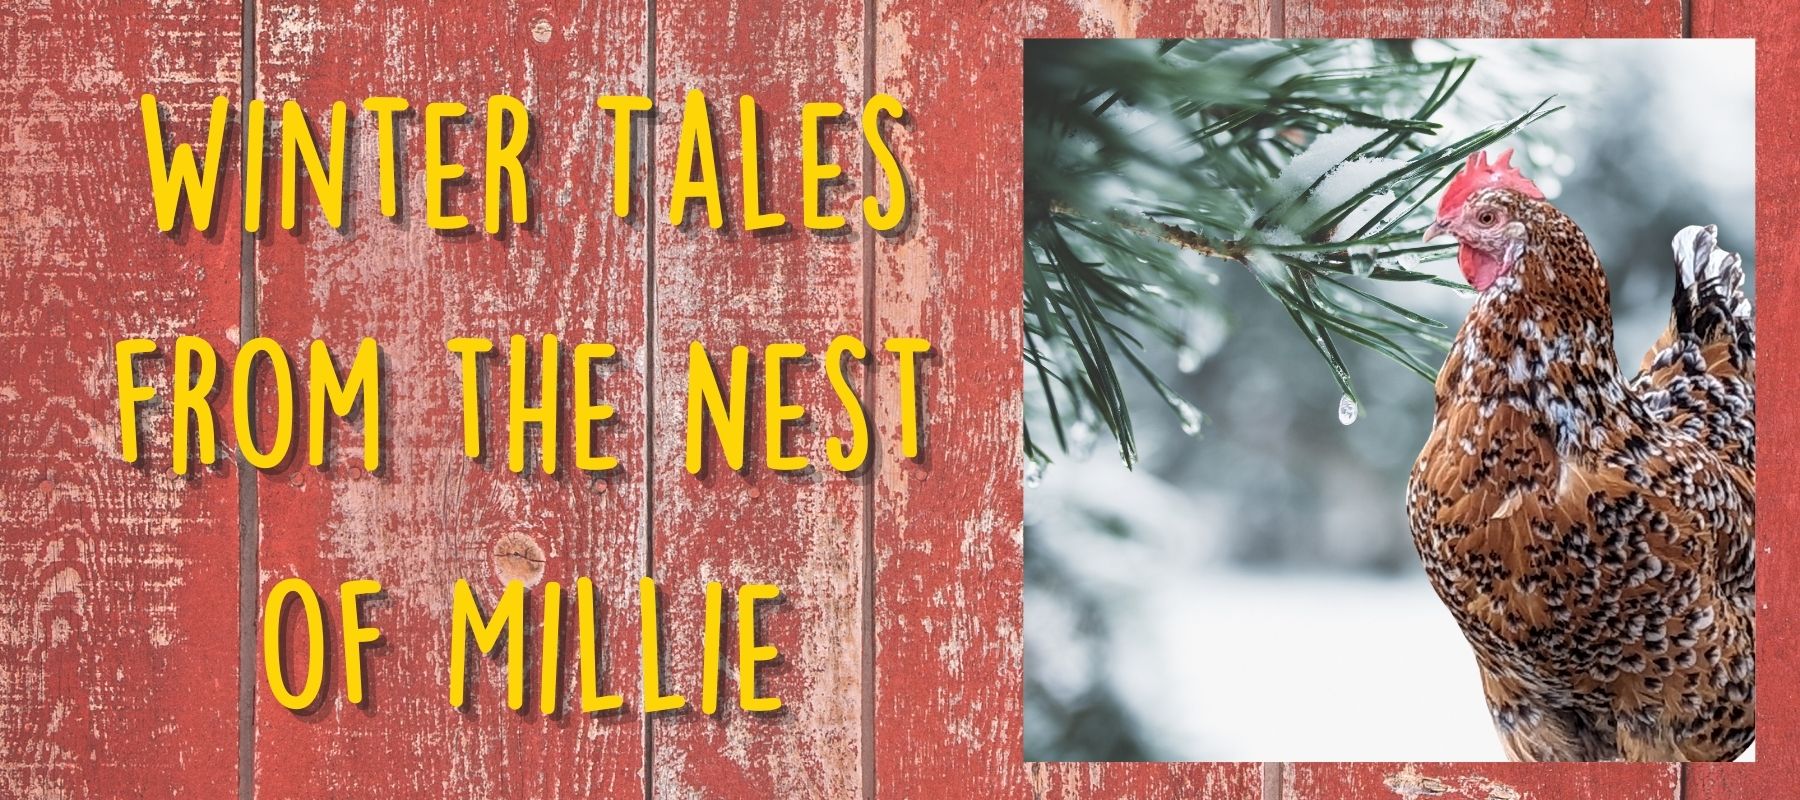 Winter Tales from the Nest of Millie